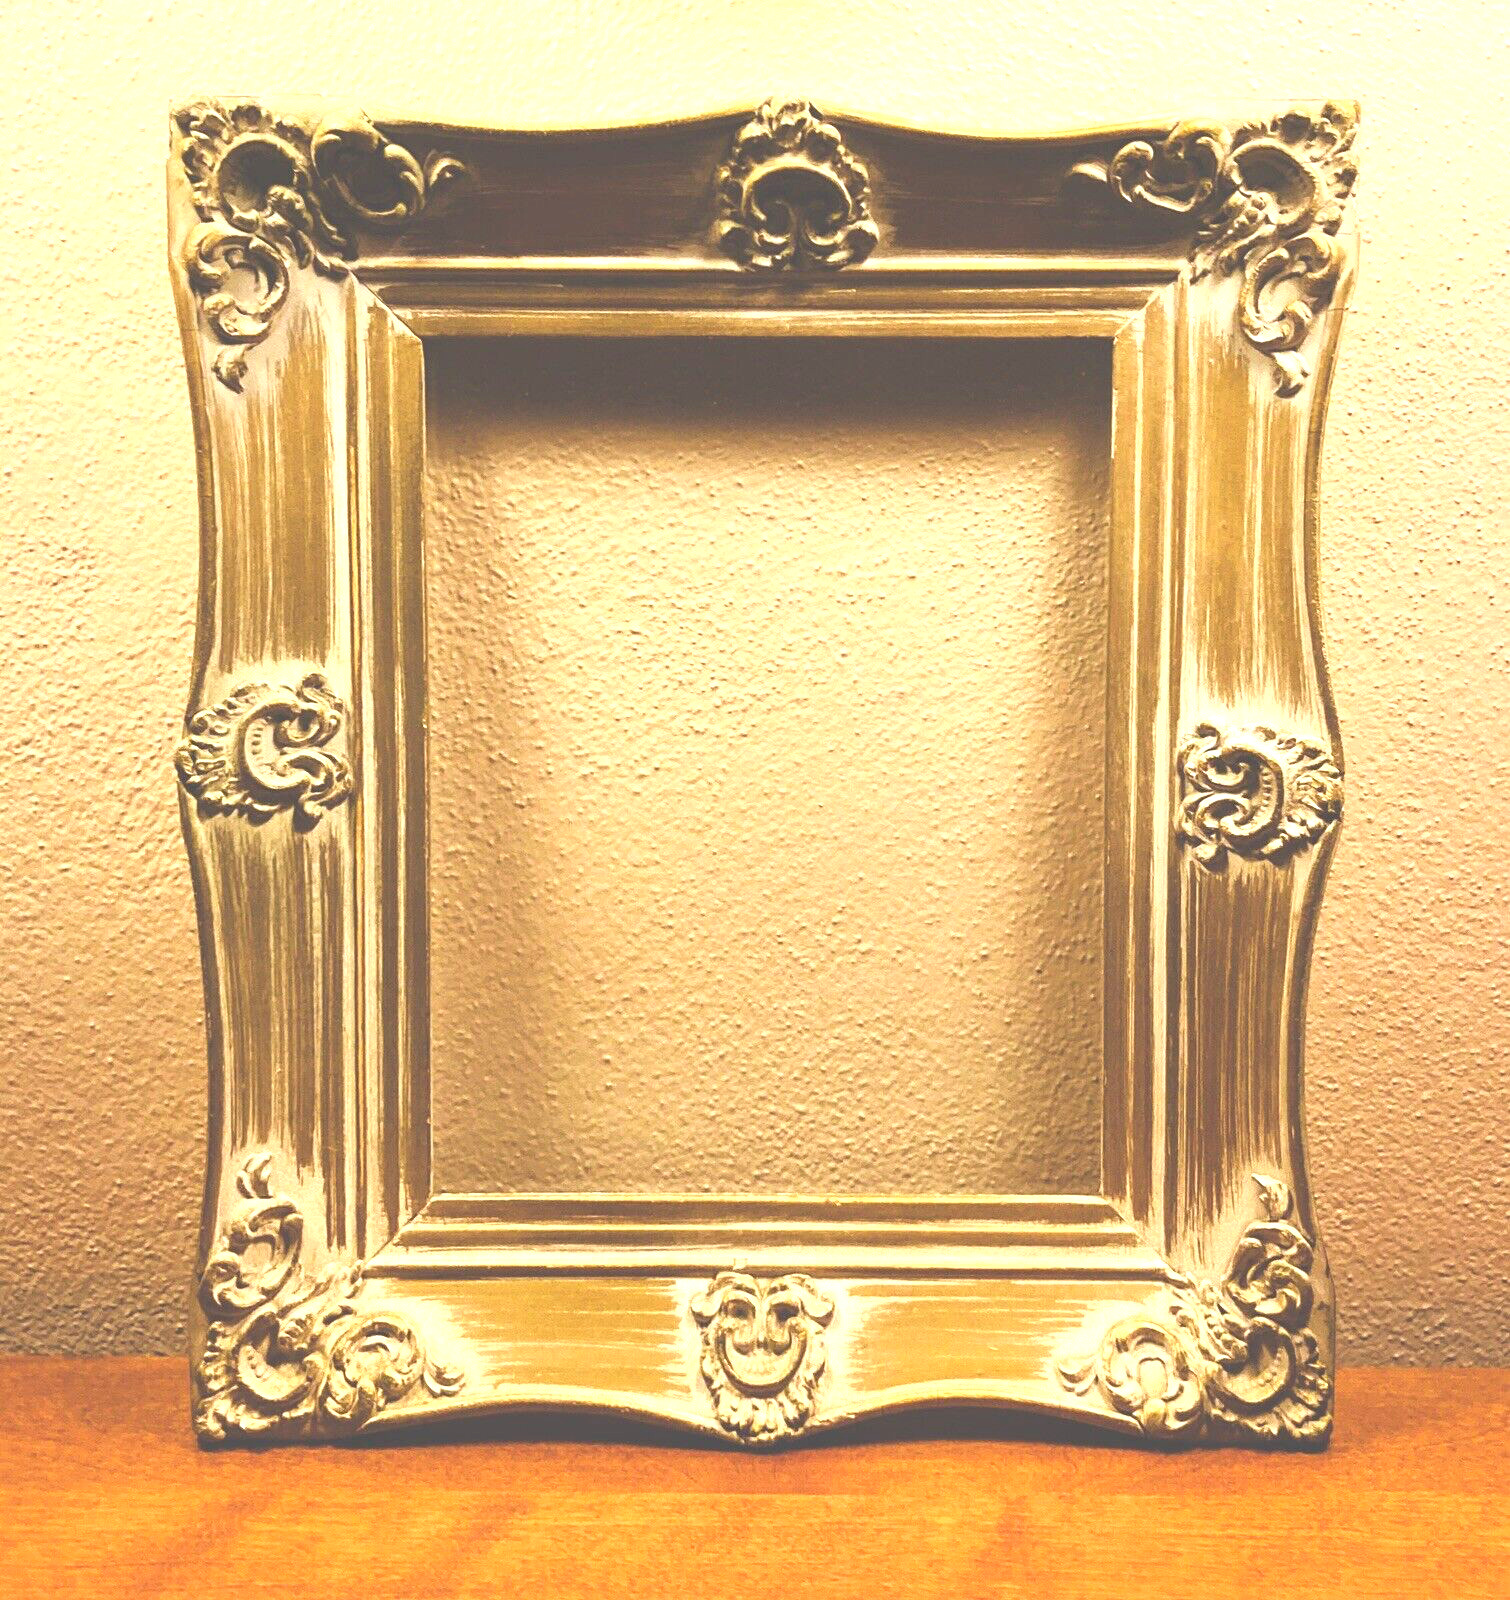 Vintage Solid Wood Picture Frame Baroque Rococo With Plaster Accents Holds 8x10